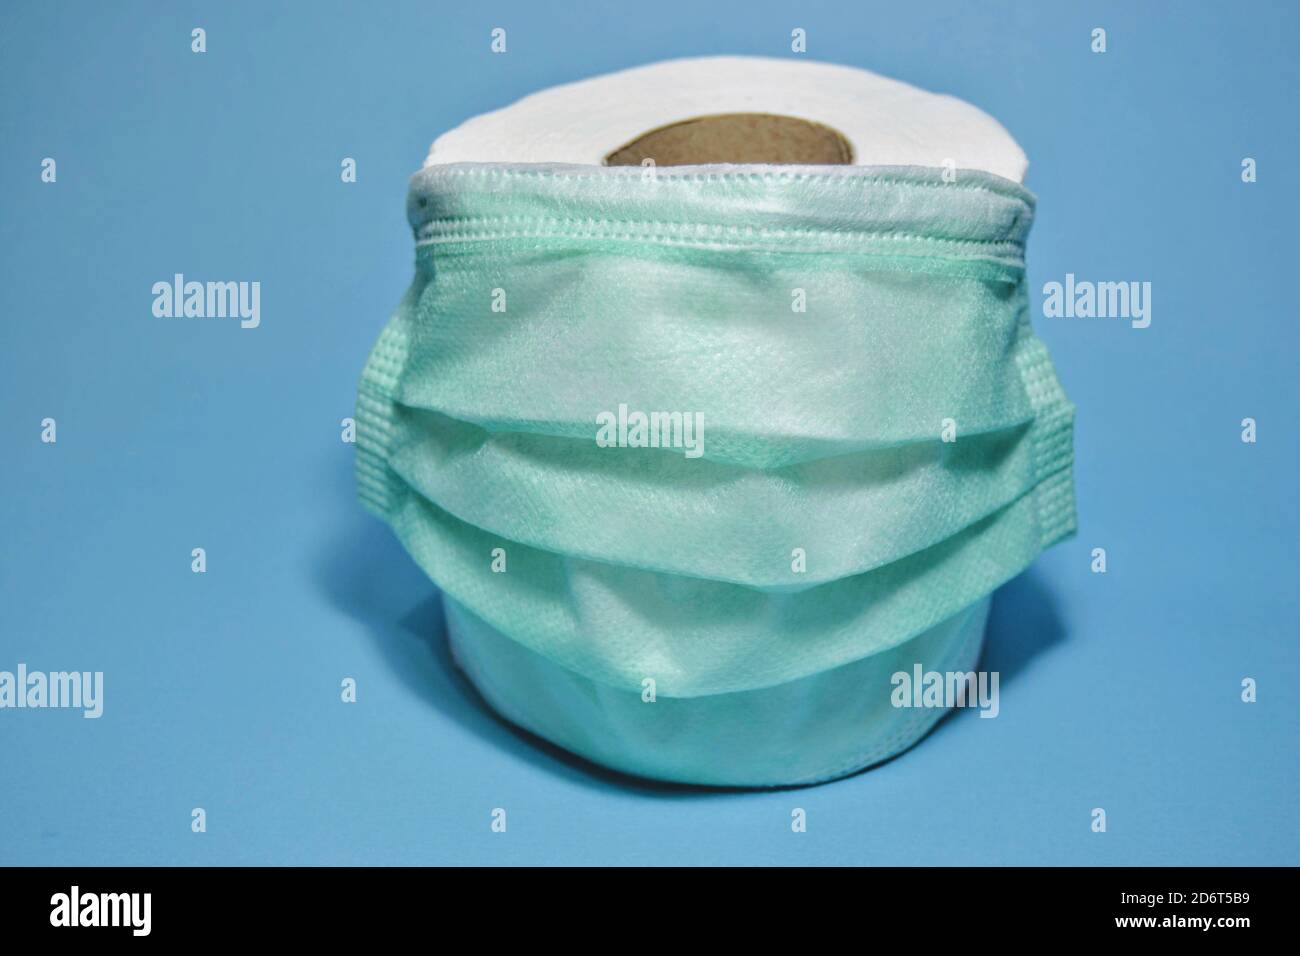 The two most discussed objects in 2020: mask and toilet paper. A photo includes green medical mask and white toilet tissue. Stock Photo